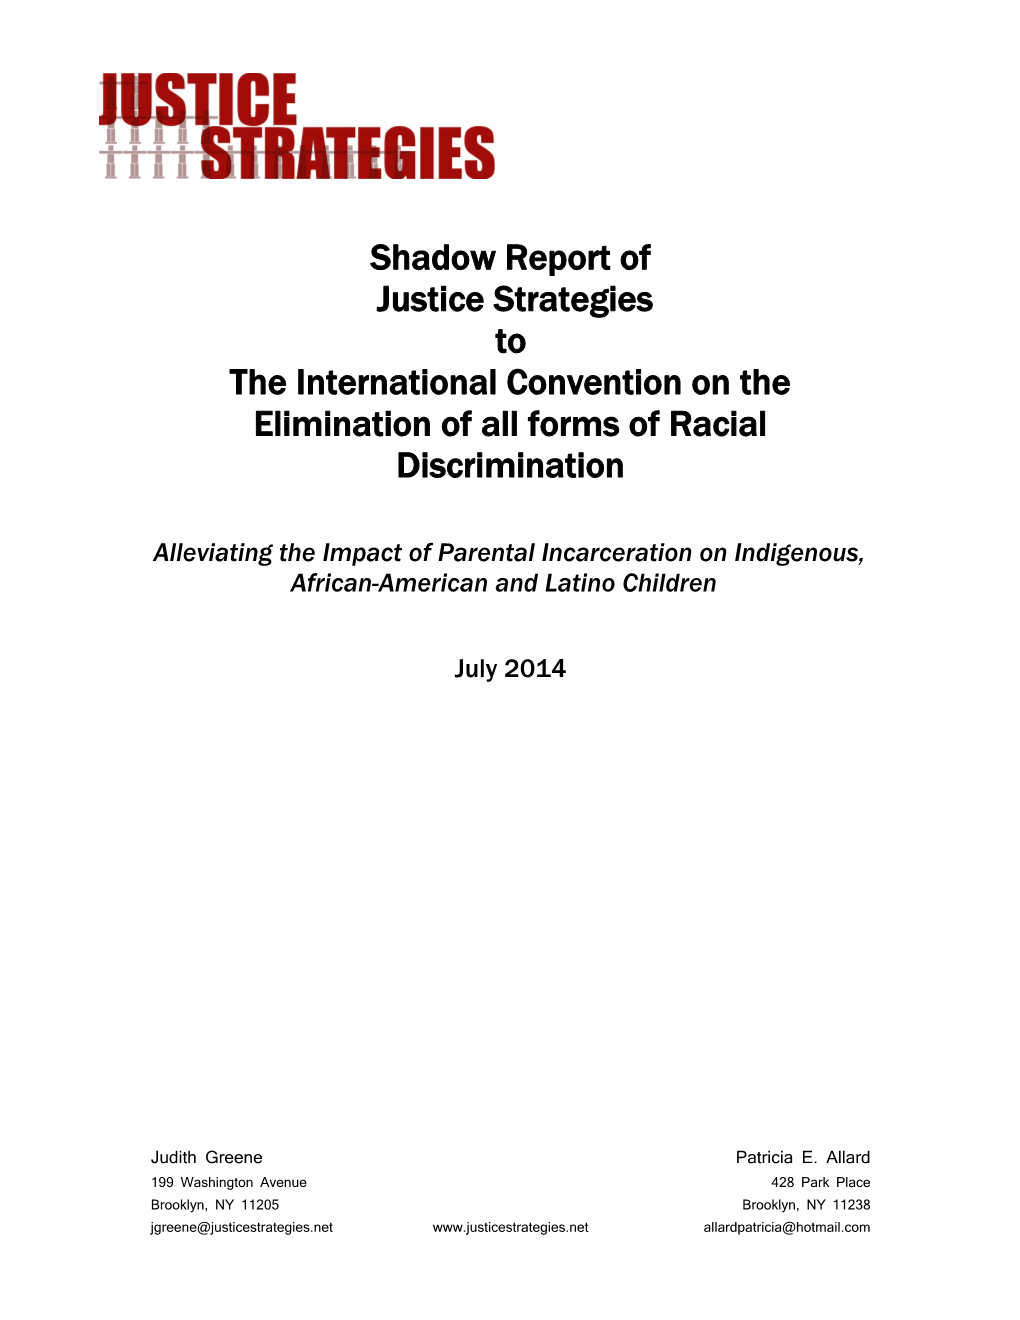 The International Convention on the Elimination of All Forms of Racial Discrimination